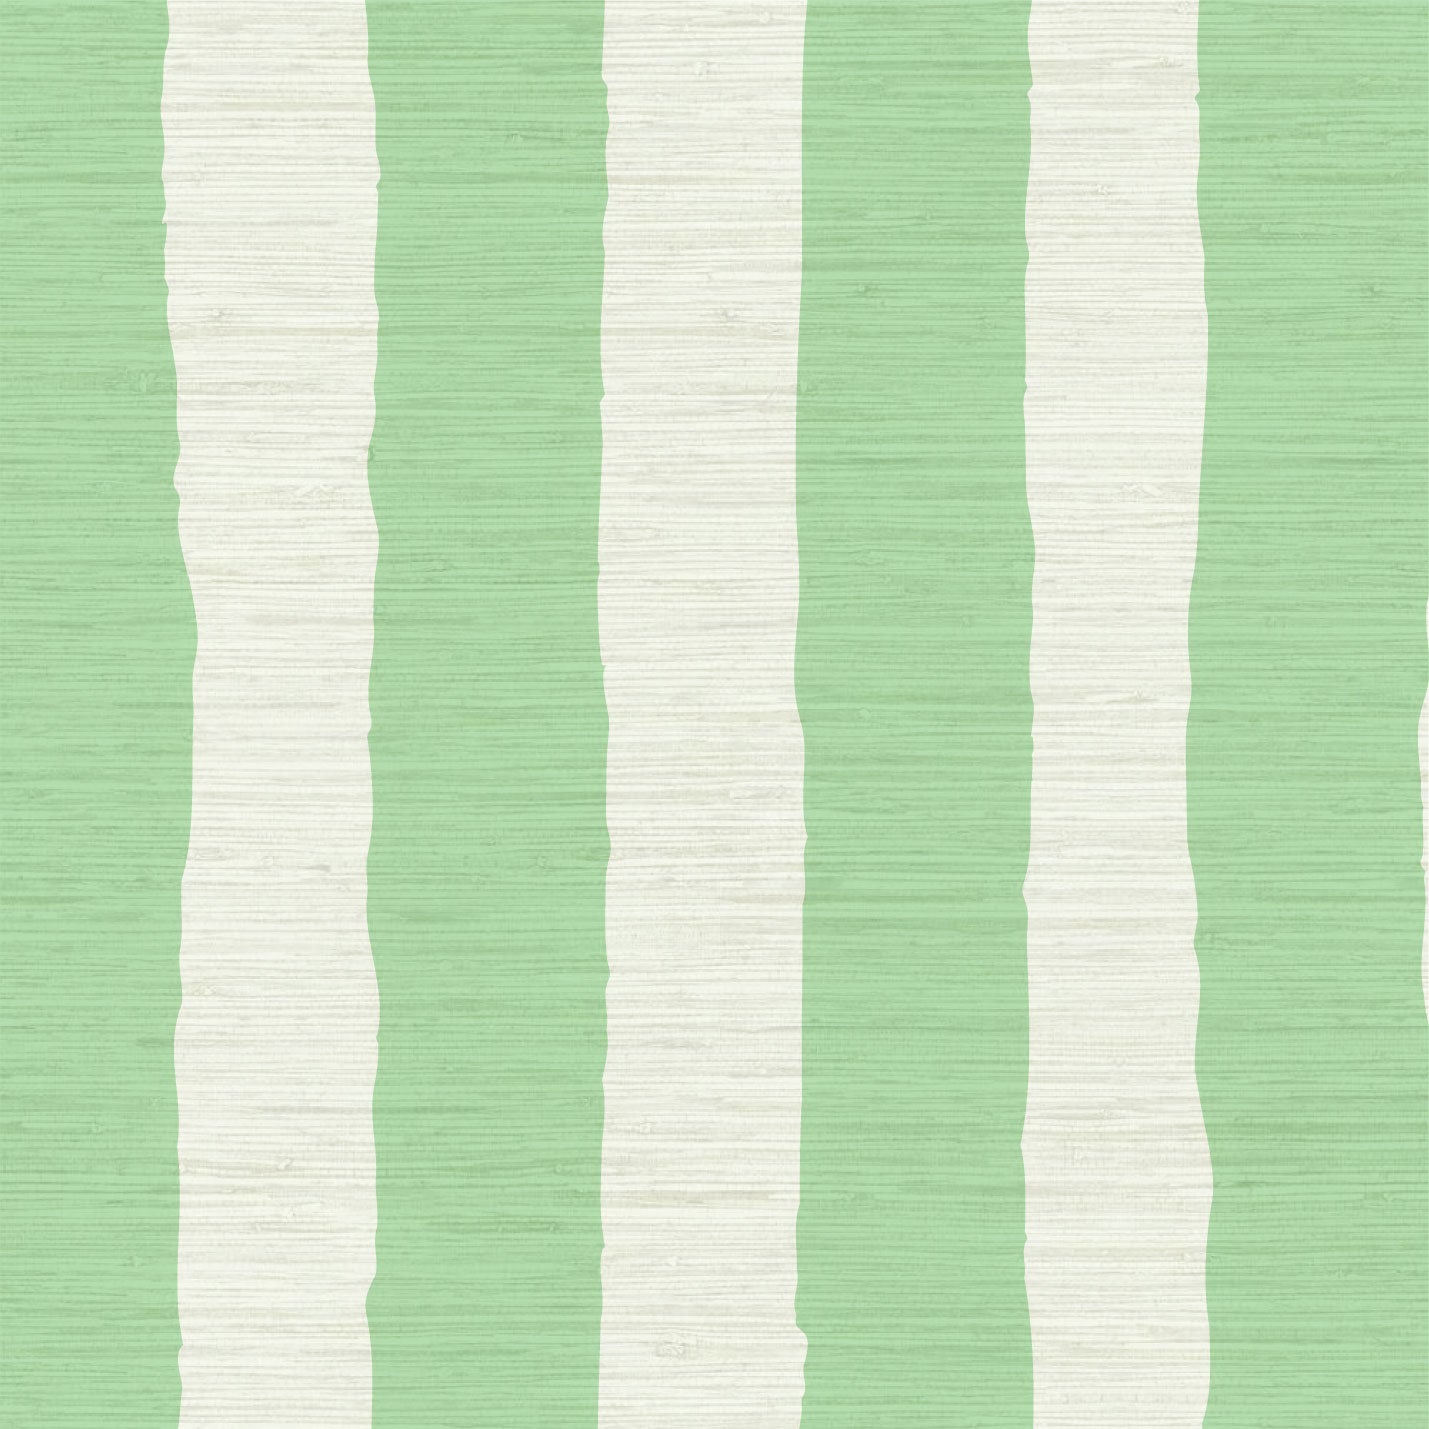 Grasscloth wallpaper Natural Textured Eco-Friendly Non-toxic High-quality  Sustainable Interior Design Bold Custom Tailor-made Retro chic Tropical Jungle Coastal preppy Garden Seaside Coastal Seashore Waterfront Vacation home styling Retreat Relaxed beach vibes Beach cottage Shoreline Oceanfront Nautical wide vertical stripe cabana white mint green mojito